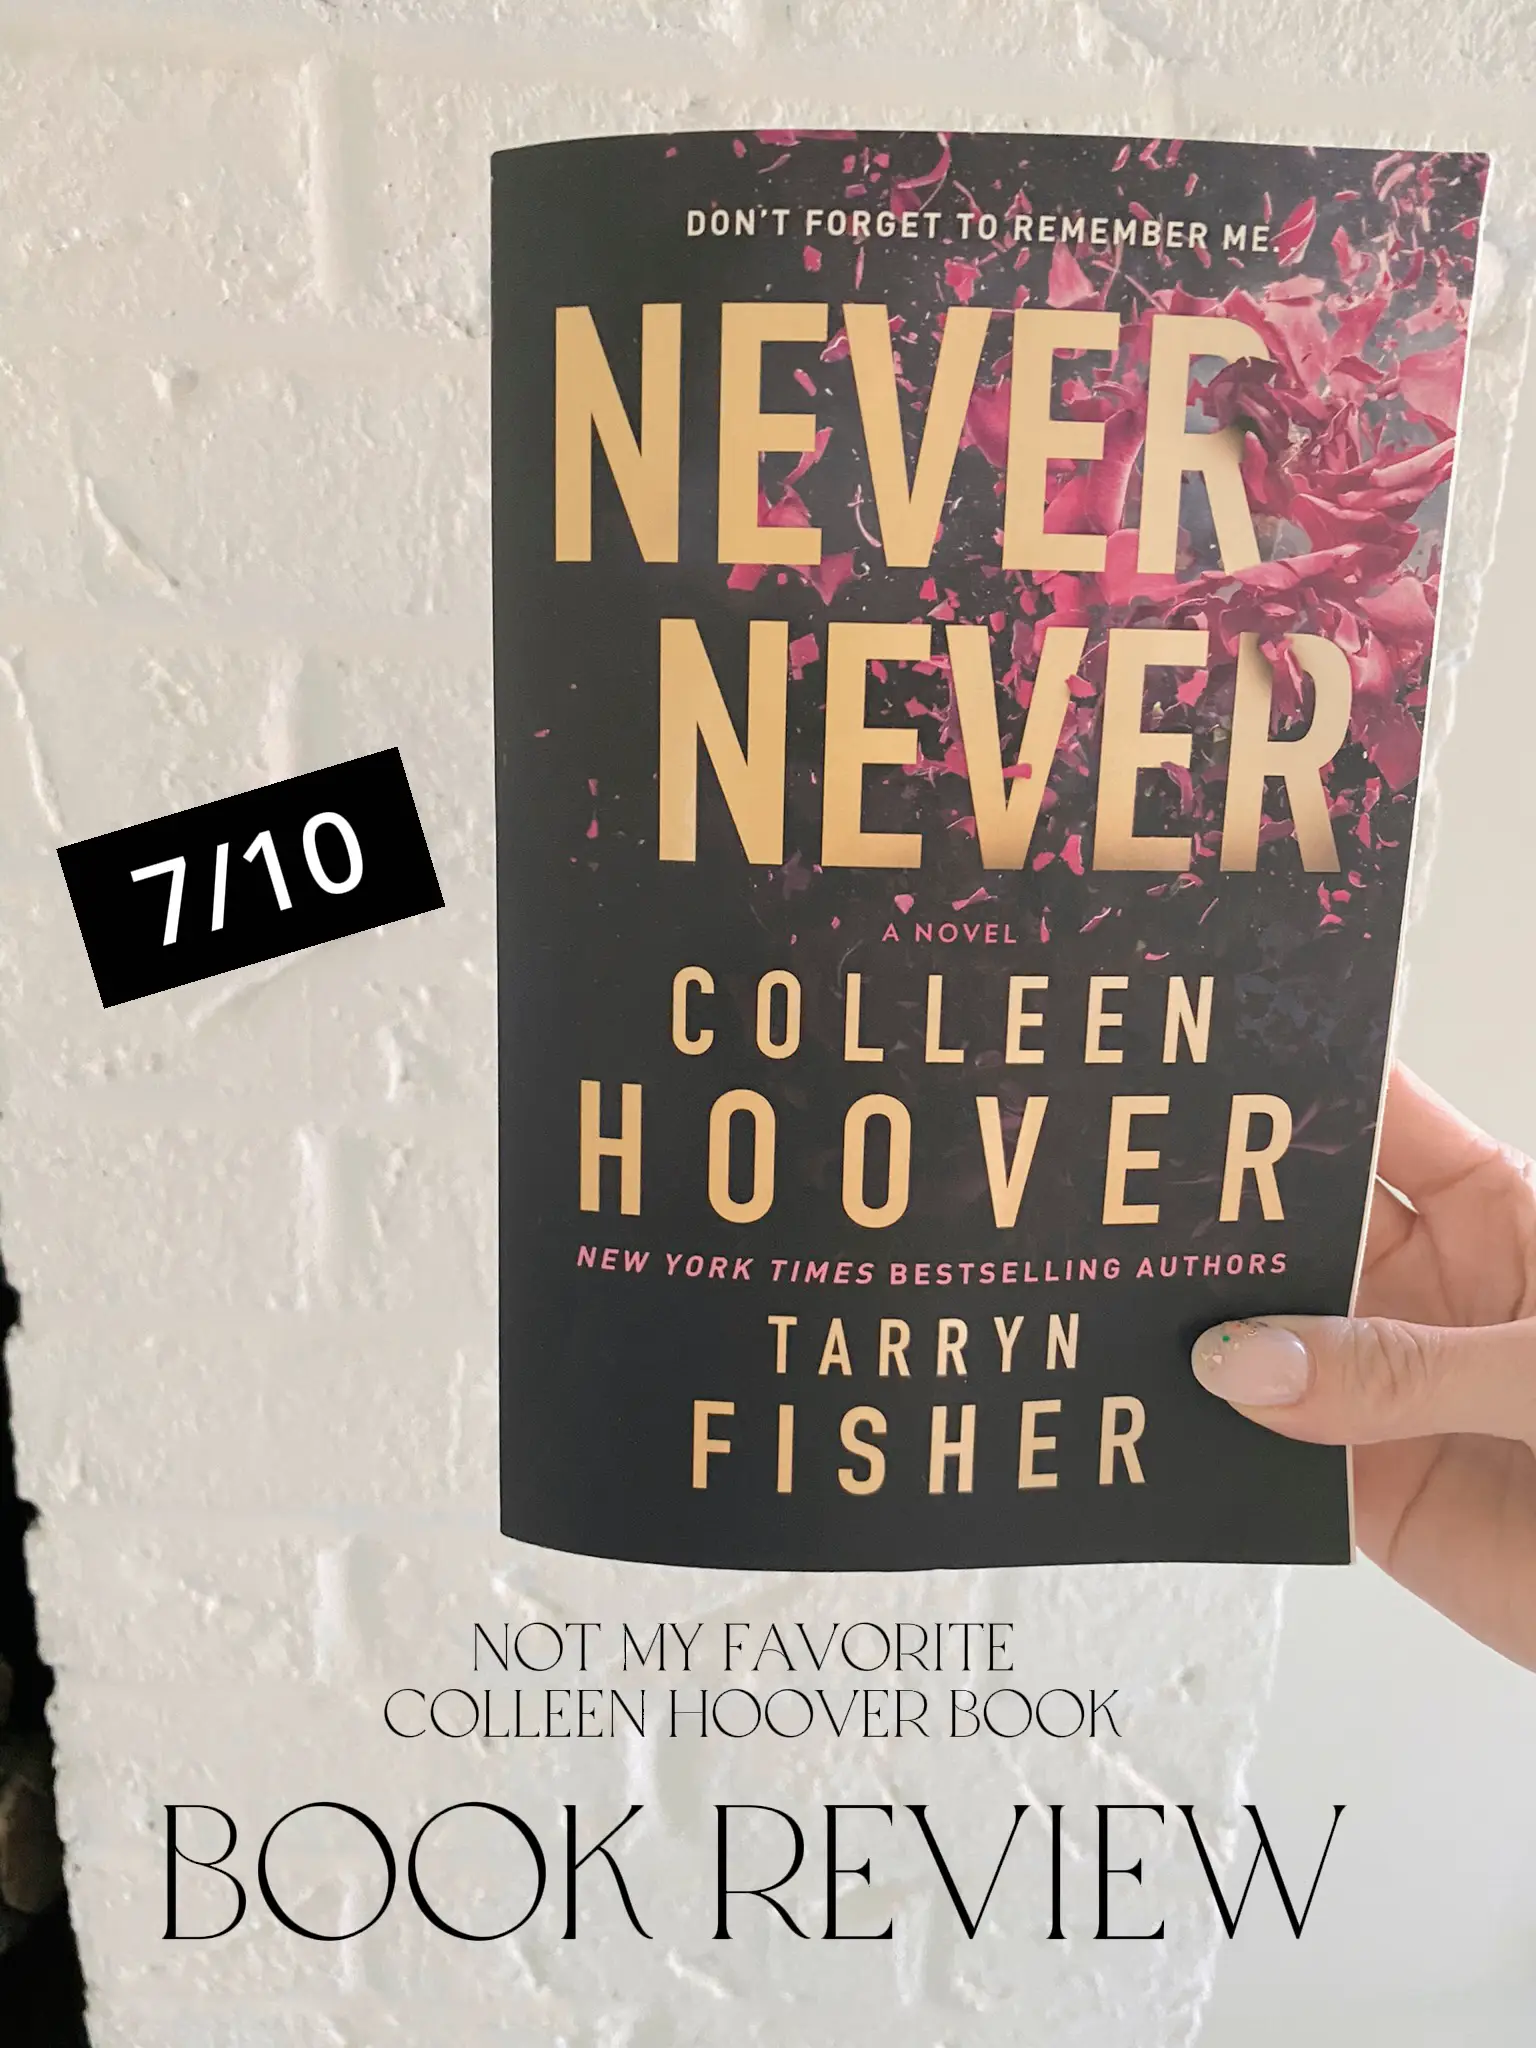 Never Never by Colleen Hoover, Tarryn Fisher